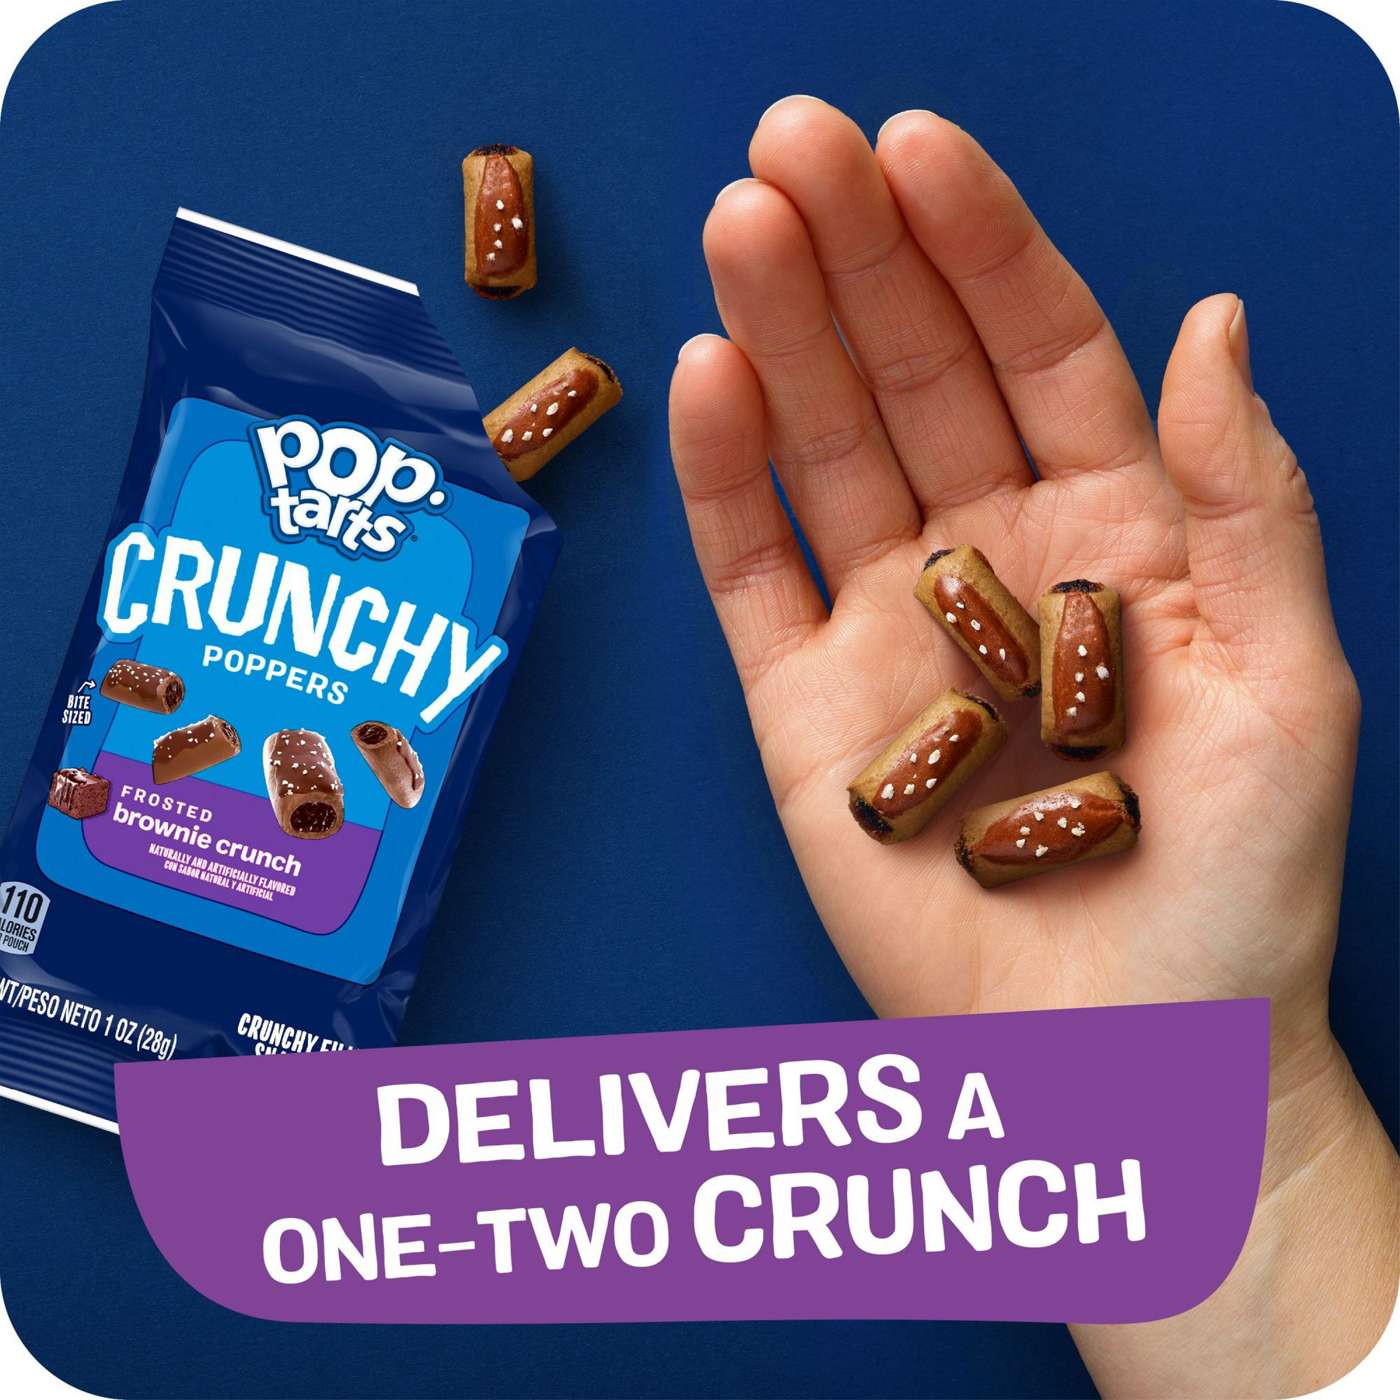 Pop-Tarts Crunchy Poppers Frosted Brownie Crunch Crunchy Filled Snack Pieces; image 2 of 6